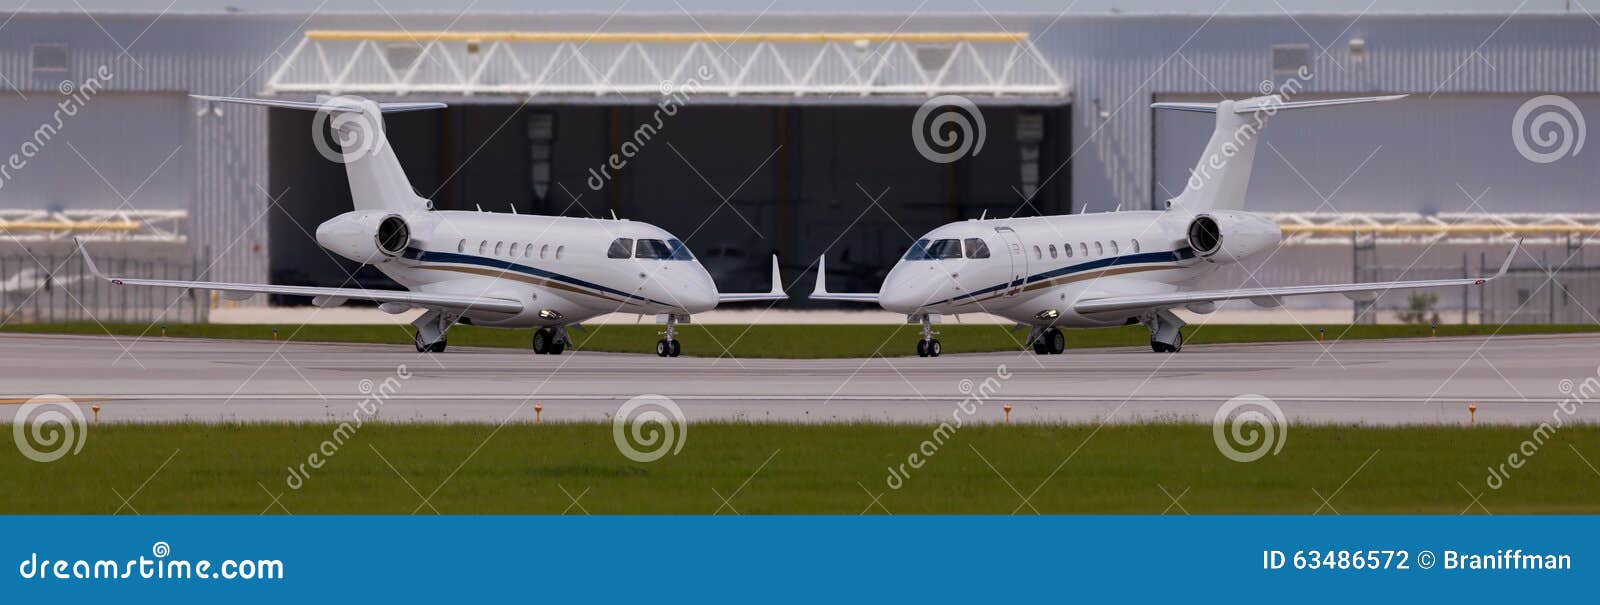 two private planes in front of a hangar